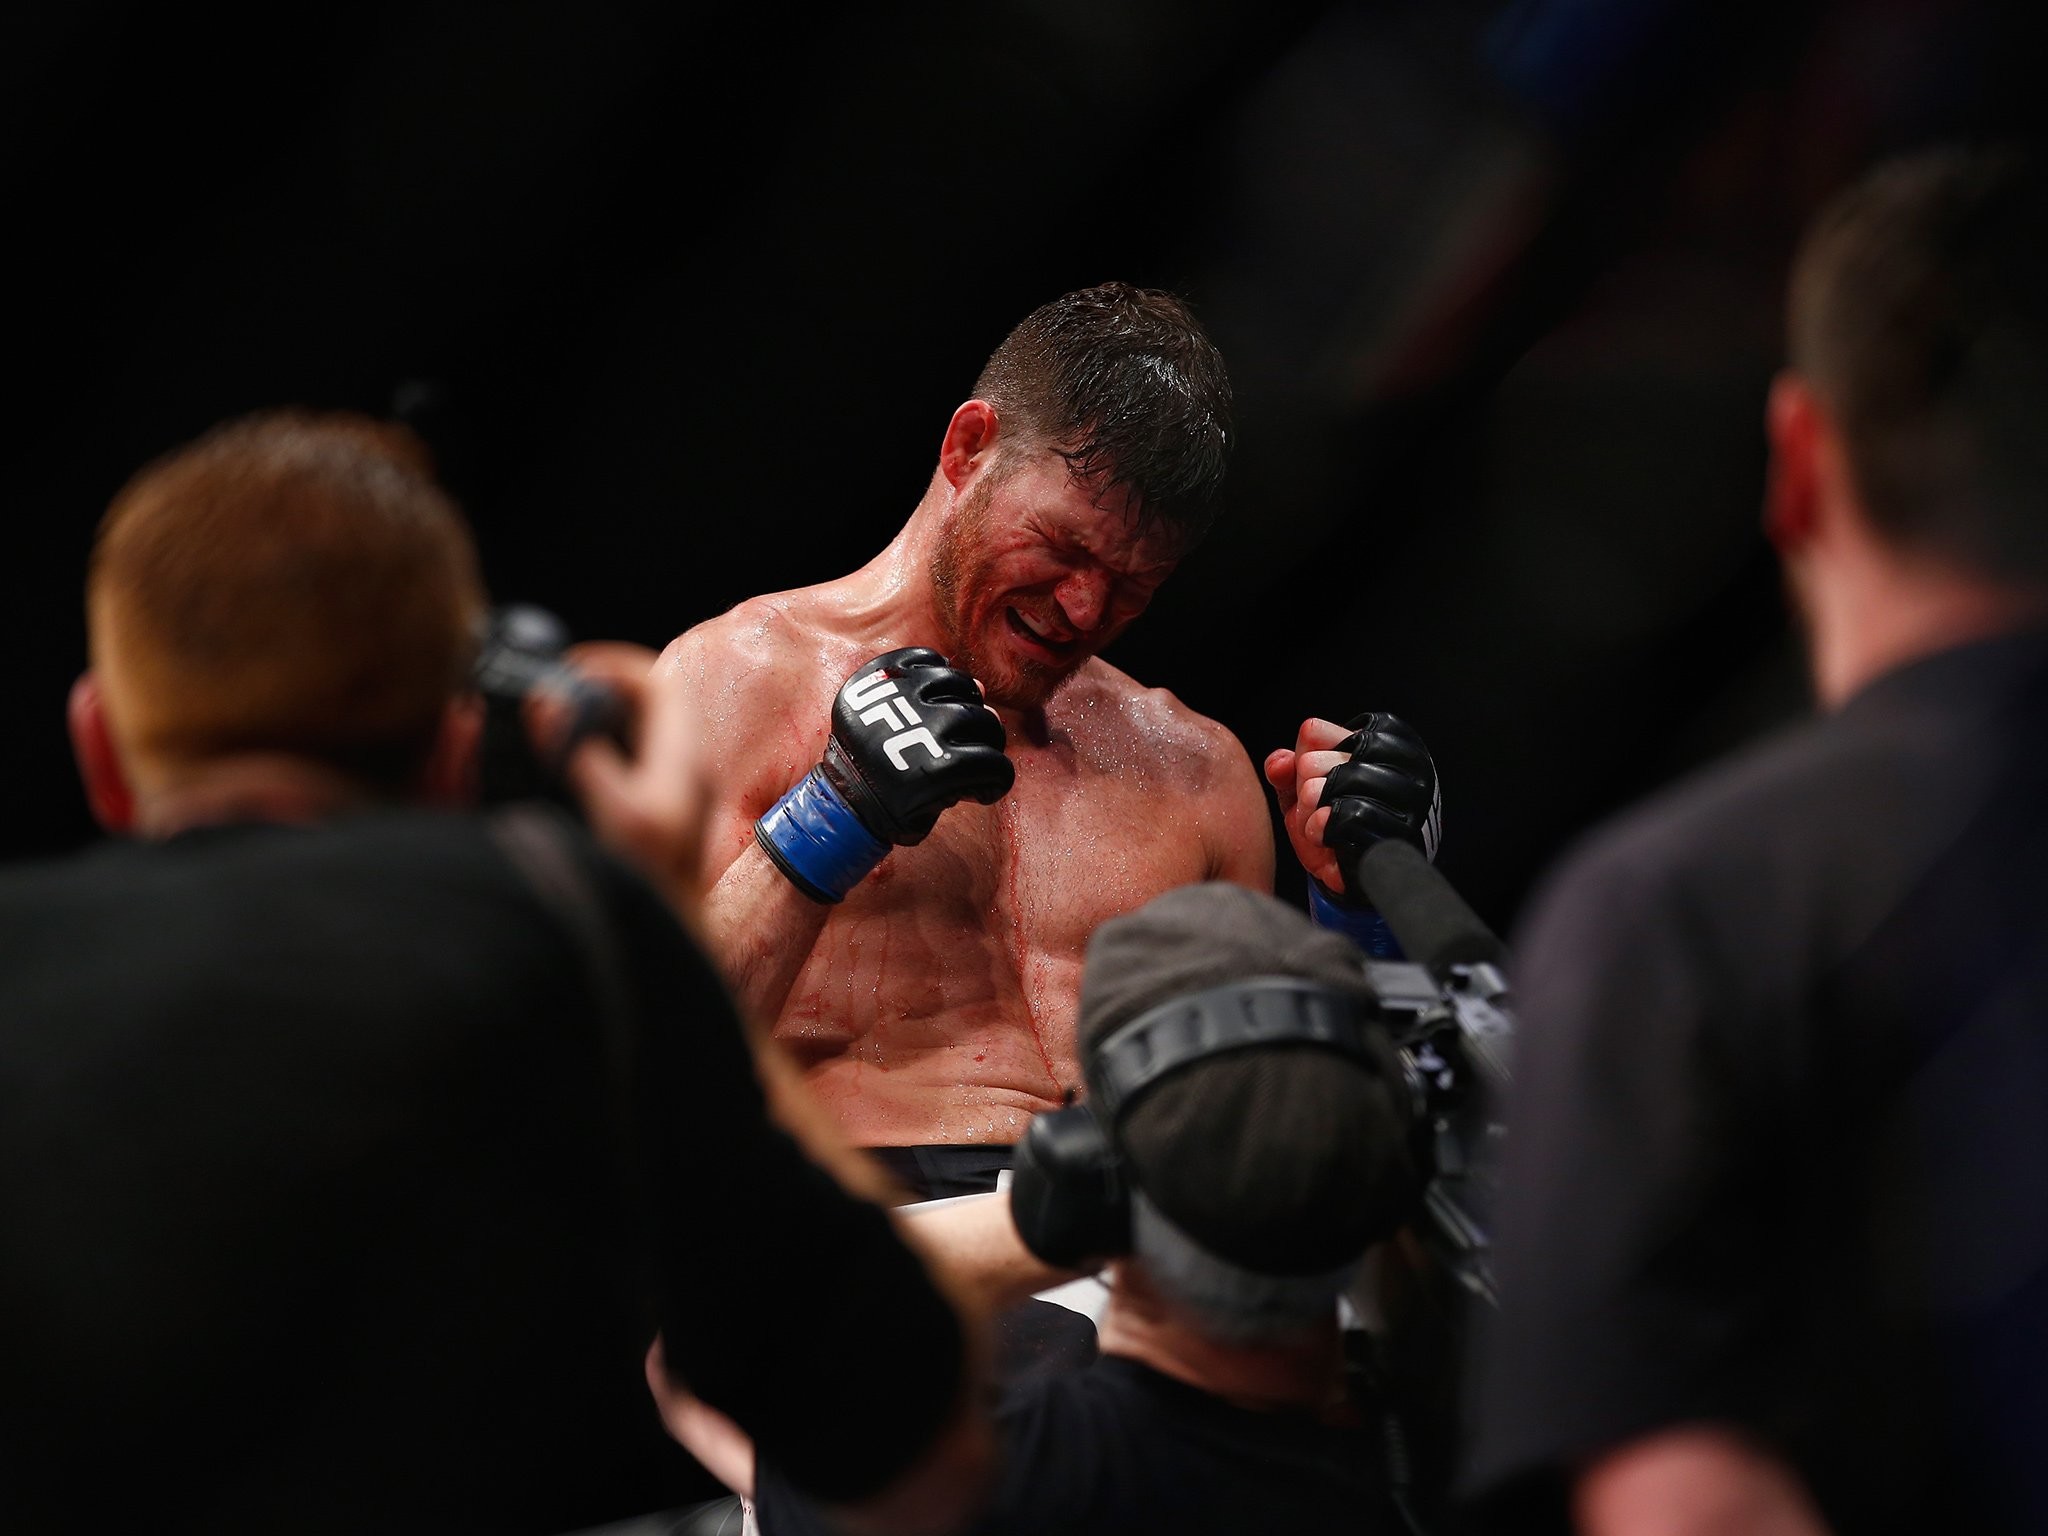 2048x1536 UFC Fight Night London results: Michael Bisping defeats Anderson Silva in  controversial main event